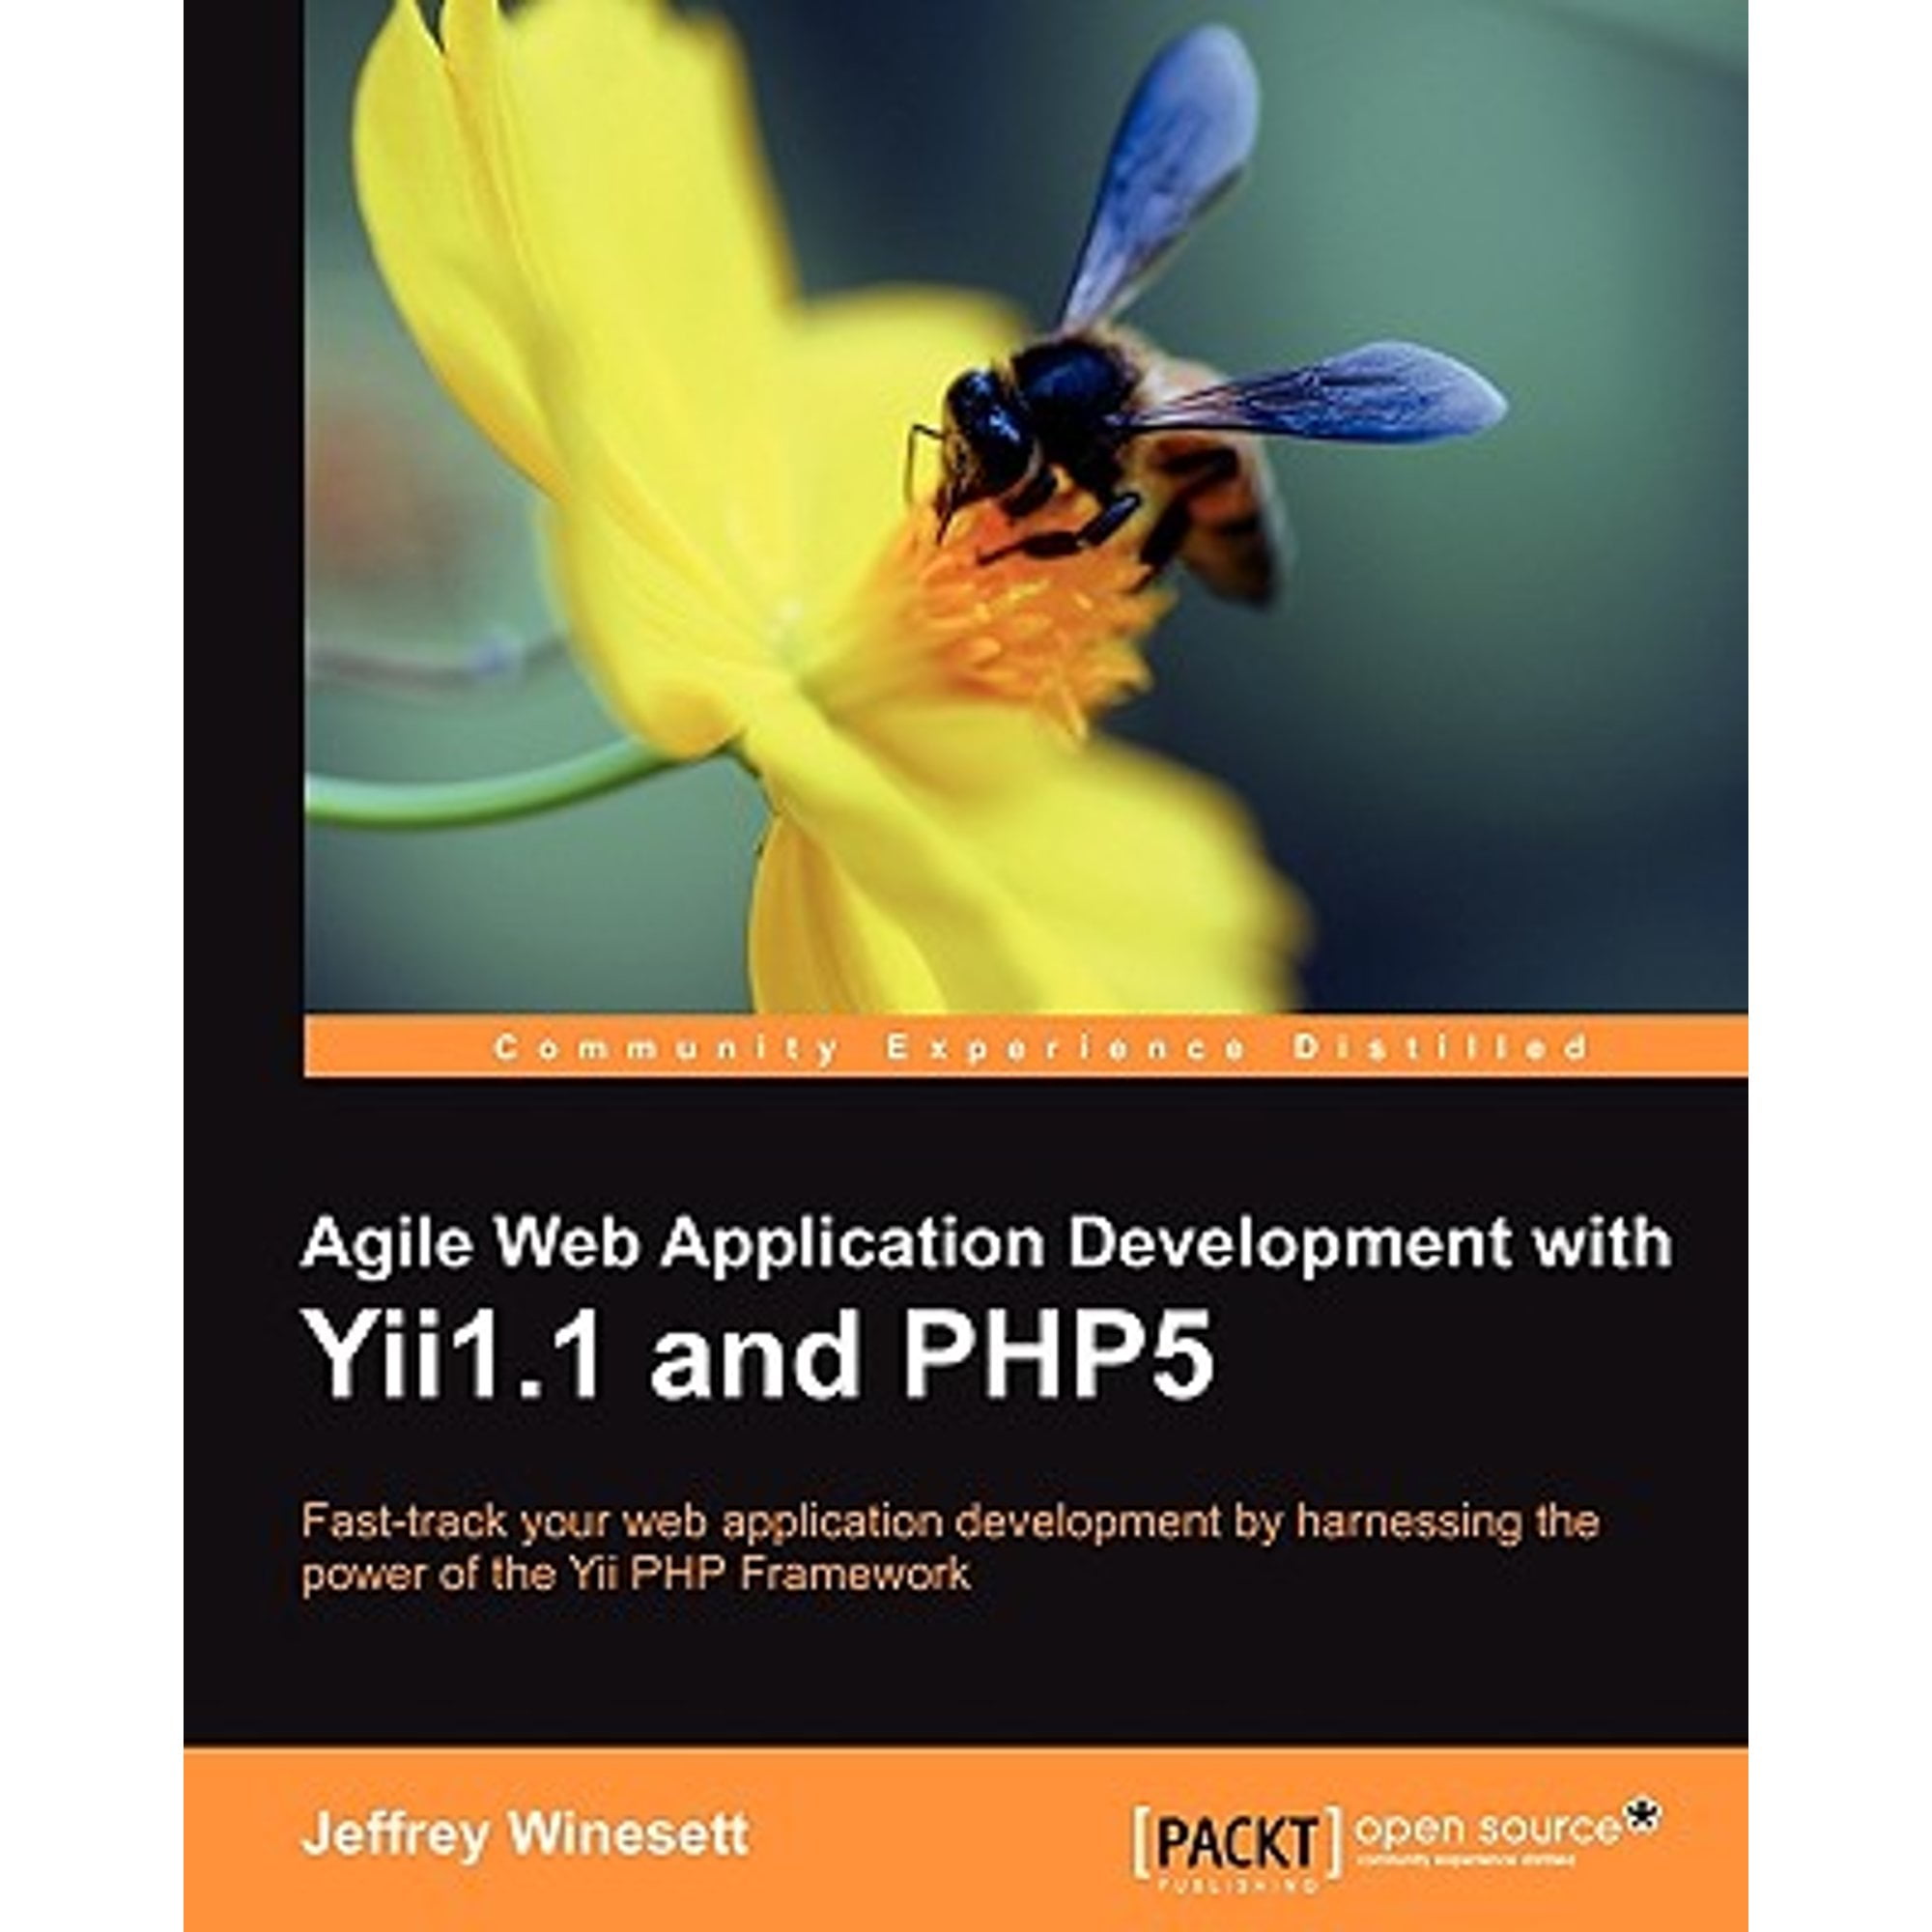 Pre-Owned Agile Web Application Development with Yii1.1 and PHP5 (Paperback) by Jeffrey Winesett